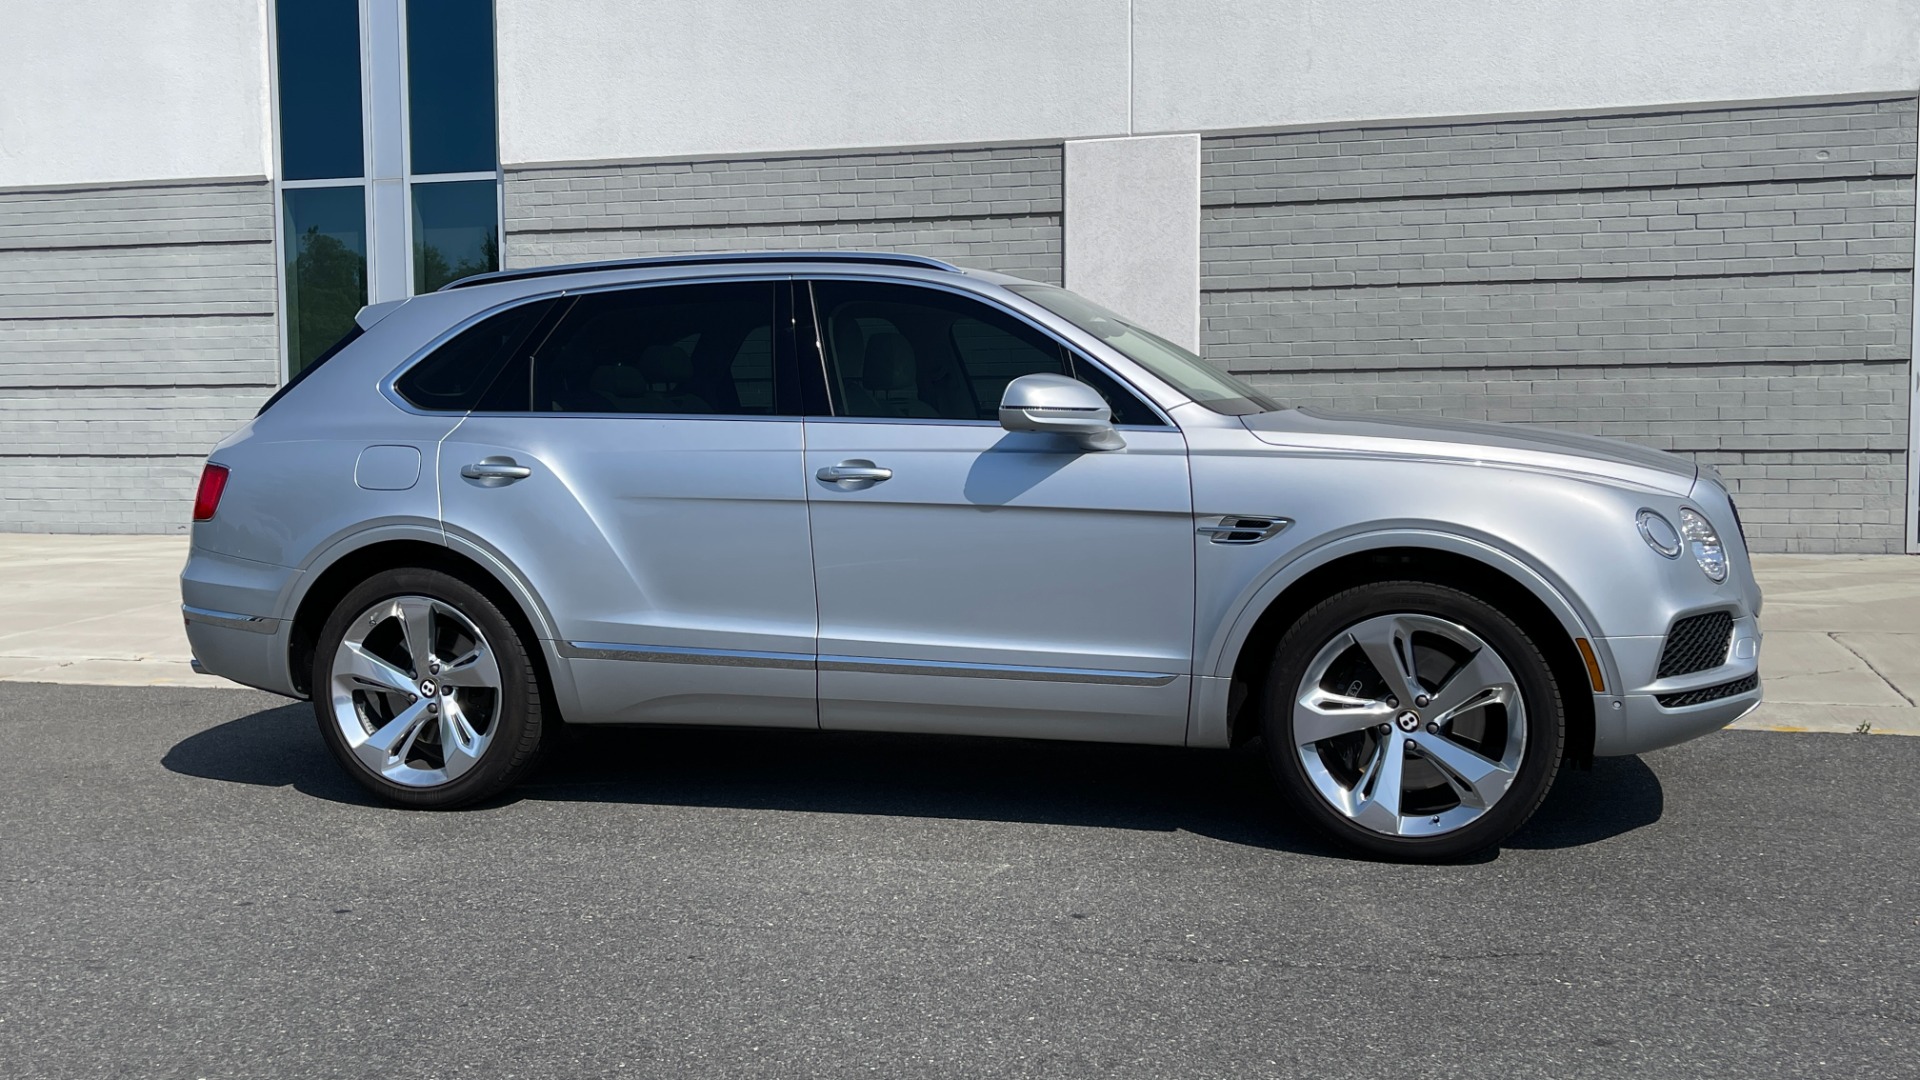 Used 2019 Bentley BENTAYGA V8 / AWD / NAV / SUNROOF / LED LIGHTING / PREMIUM AUDIO / REARVIEW for sale $125,000 at Formula Imports in Charlotte NC 28227 9